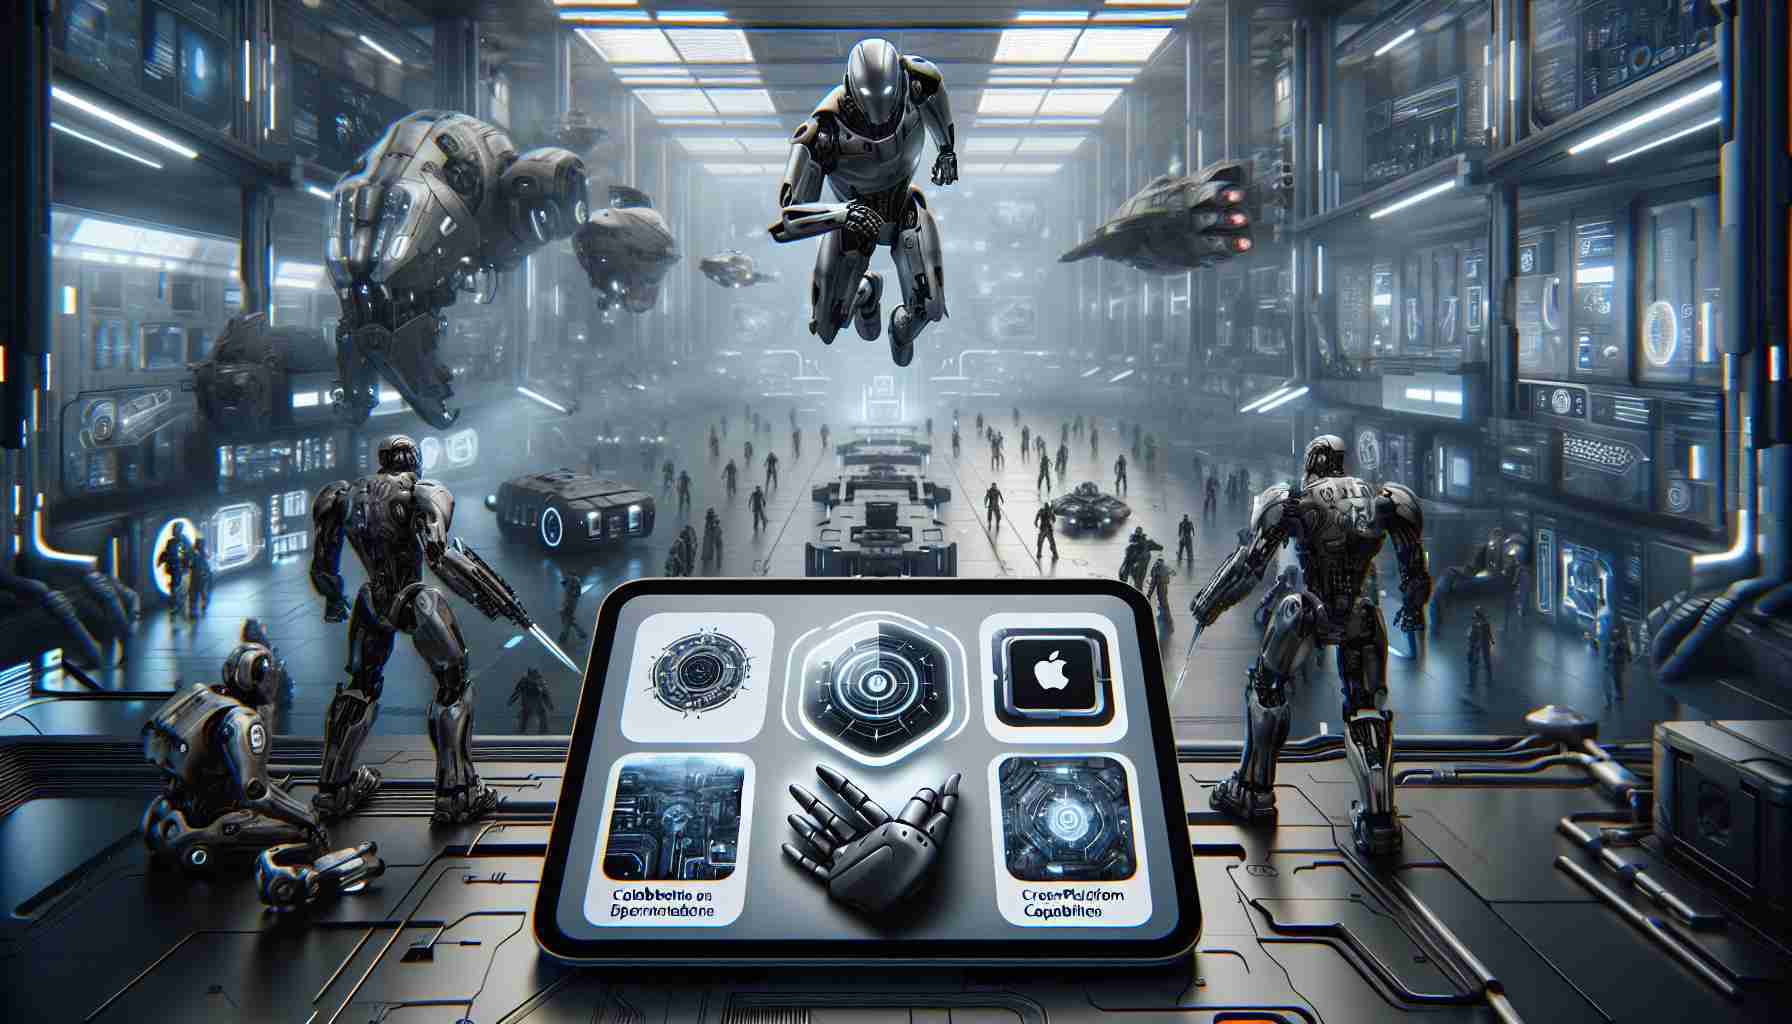 Warframe Expands Universe: Coming to iOS with Cross-Platform Play and Save